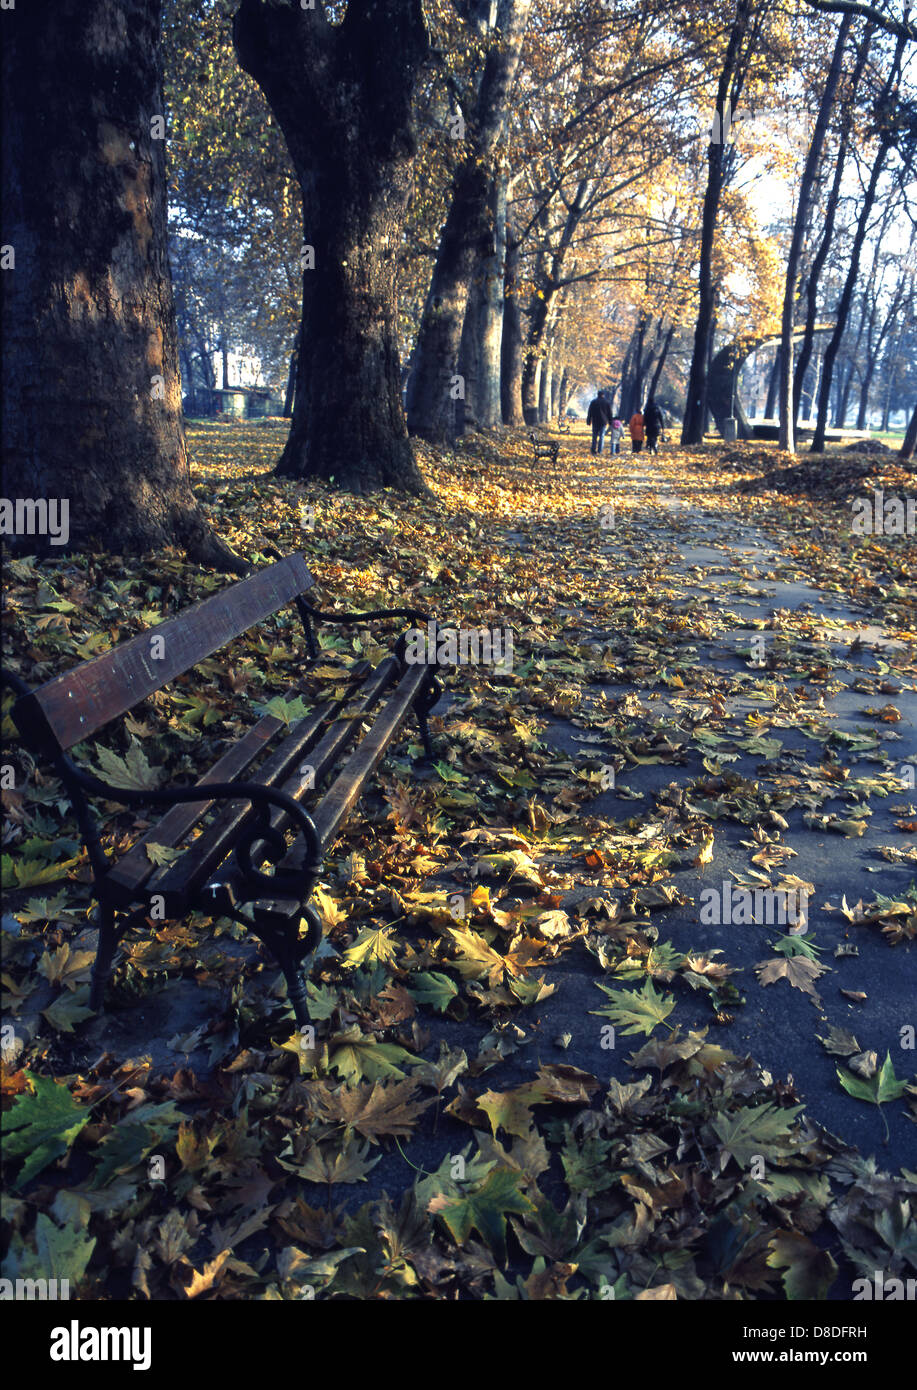 Bench in a park in autumn Stock Photo